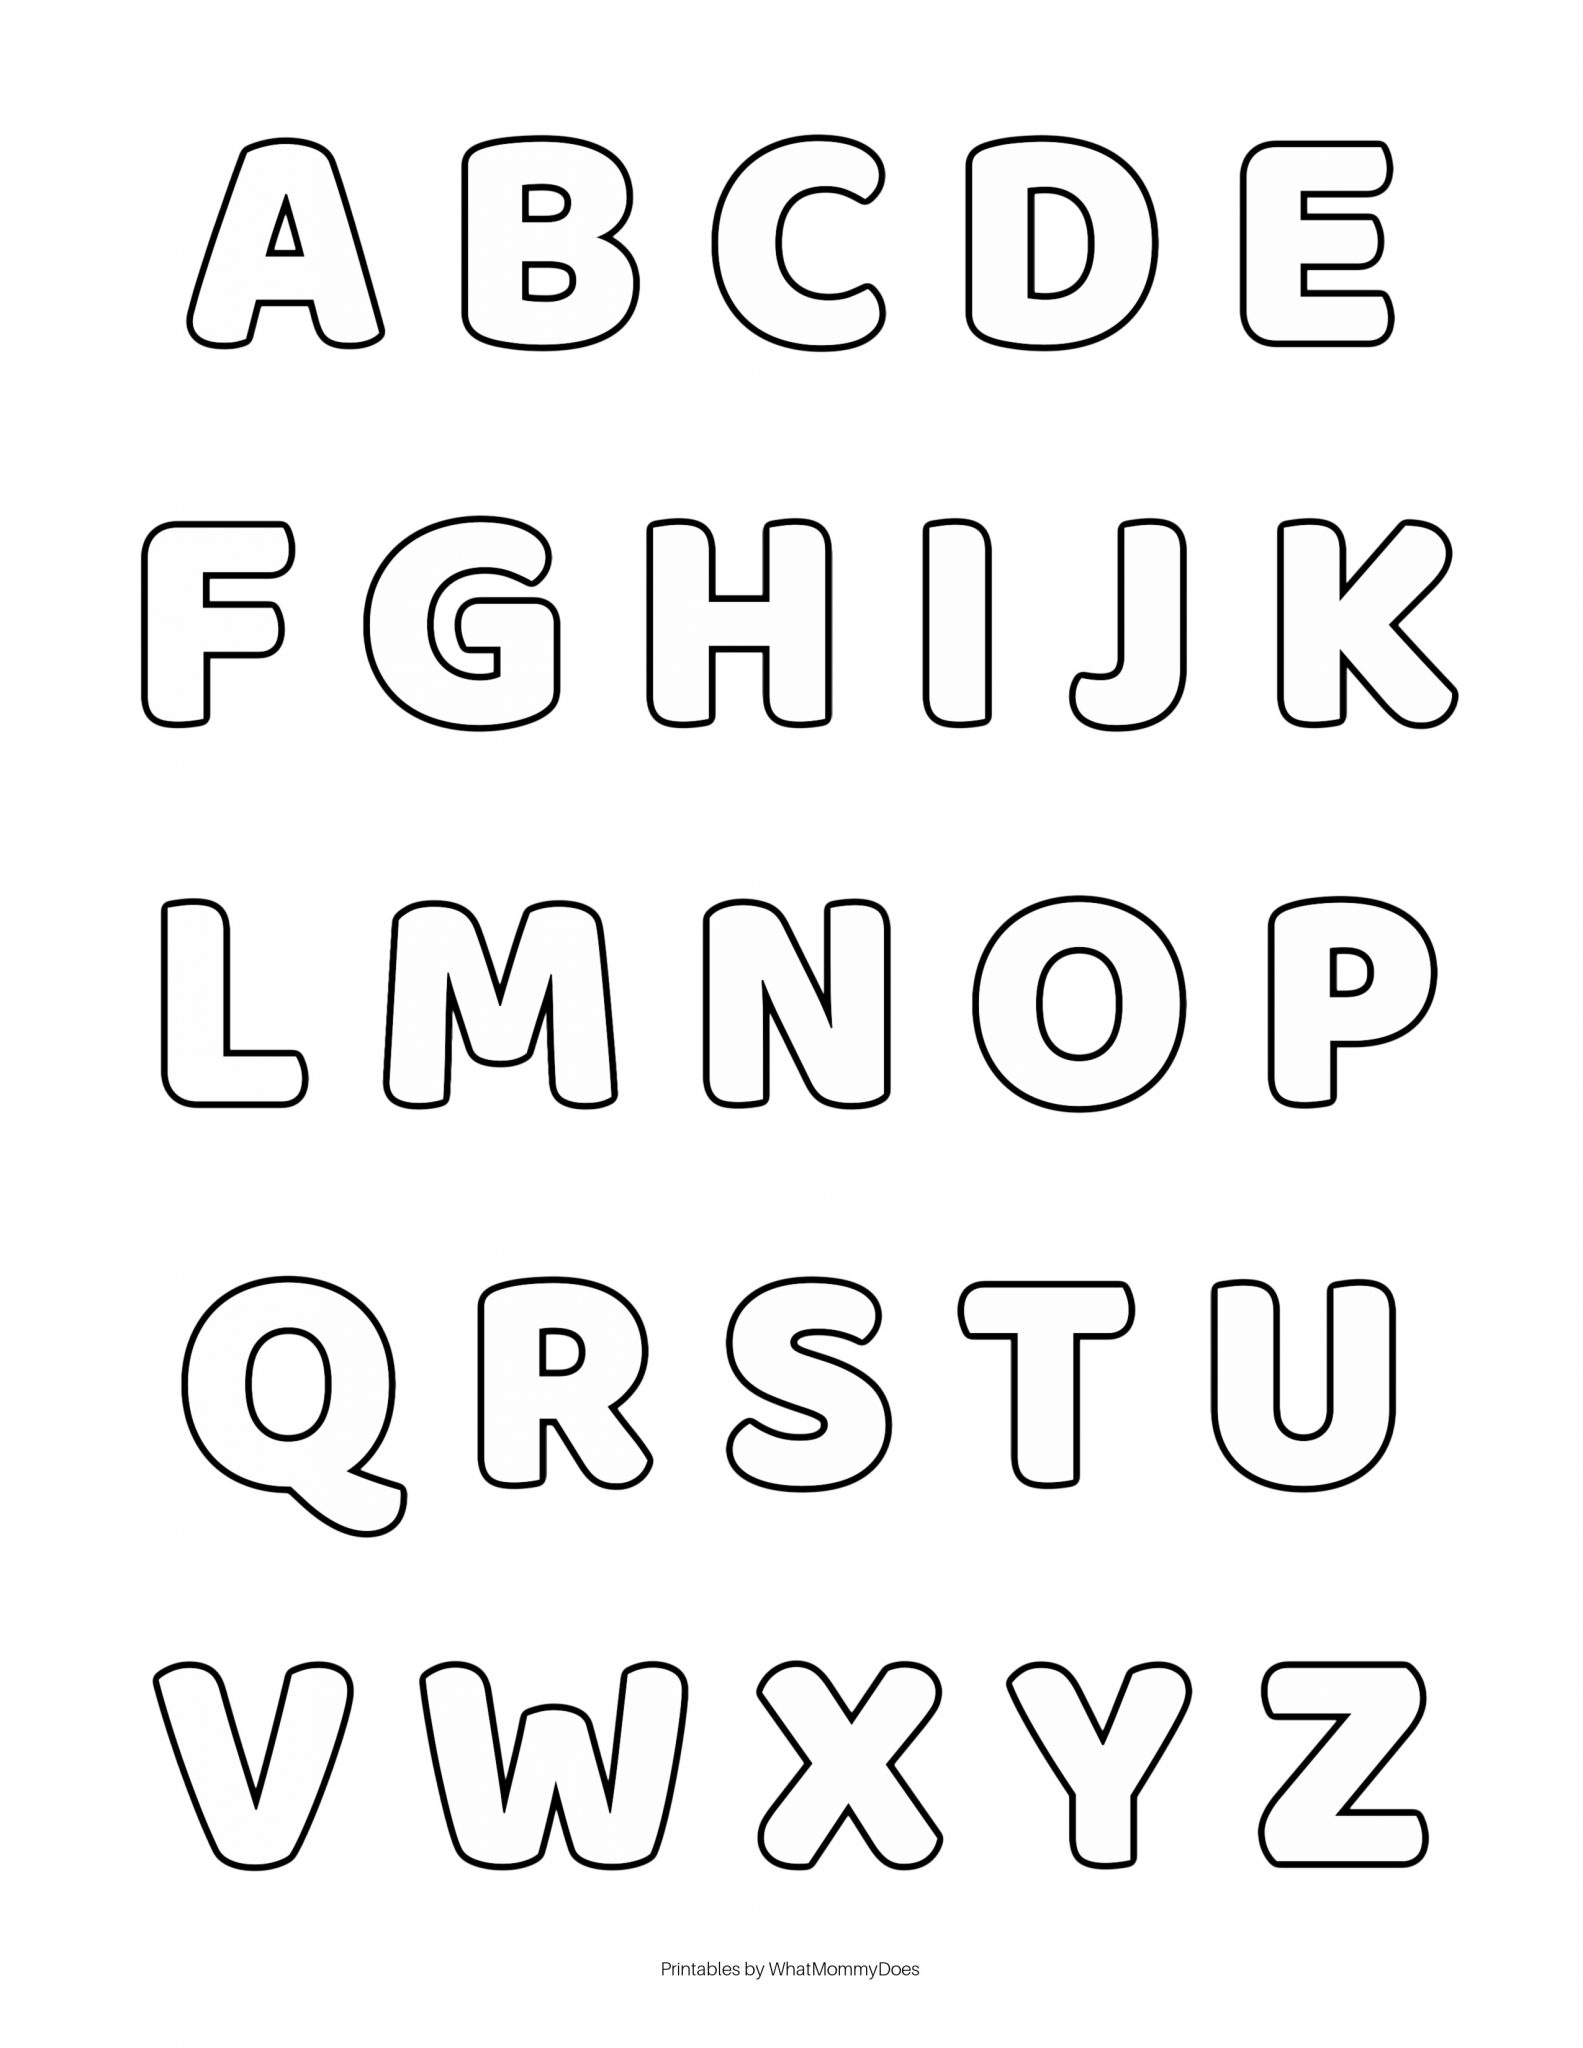 6-best-images-of-printable-alphabet-letters-to-cut-small-alphabet-letters-printable-pdf